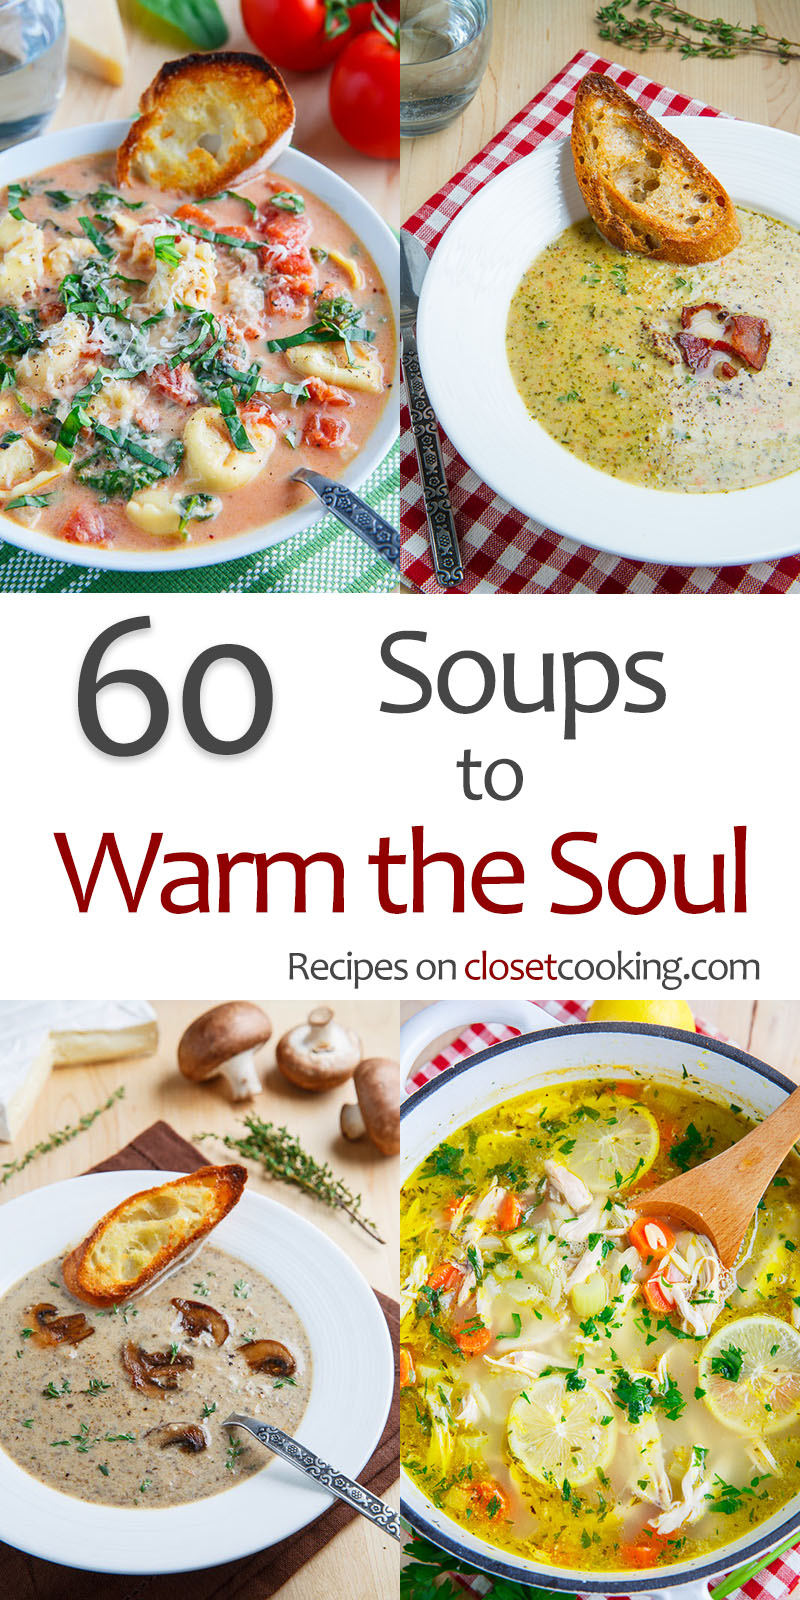 60 Soups to Warm the Soul